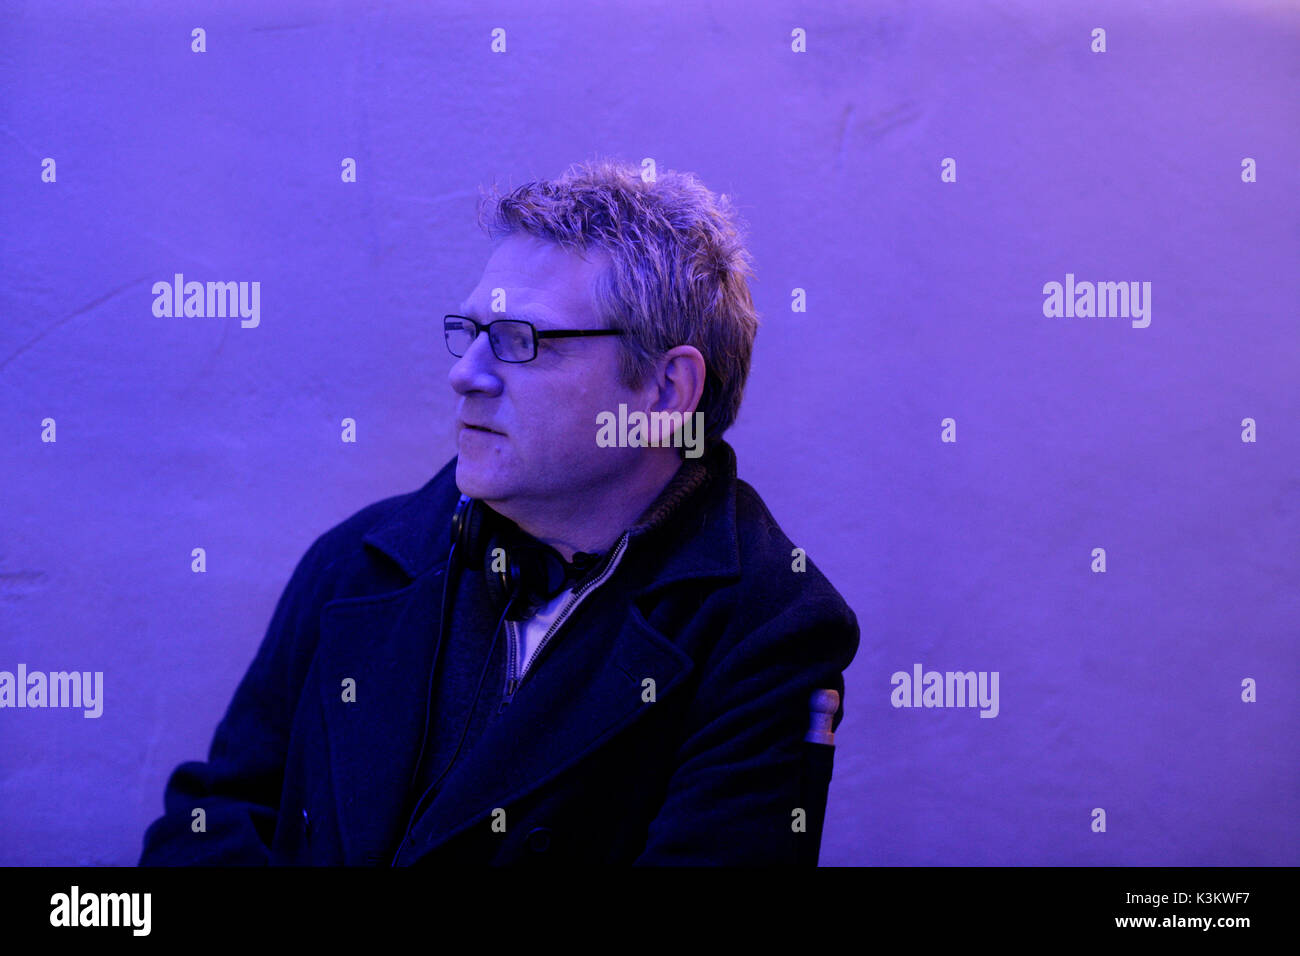 SLEUTH Director KENNETH BRANAGH       Date: 2007 Stock Photo